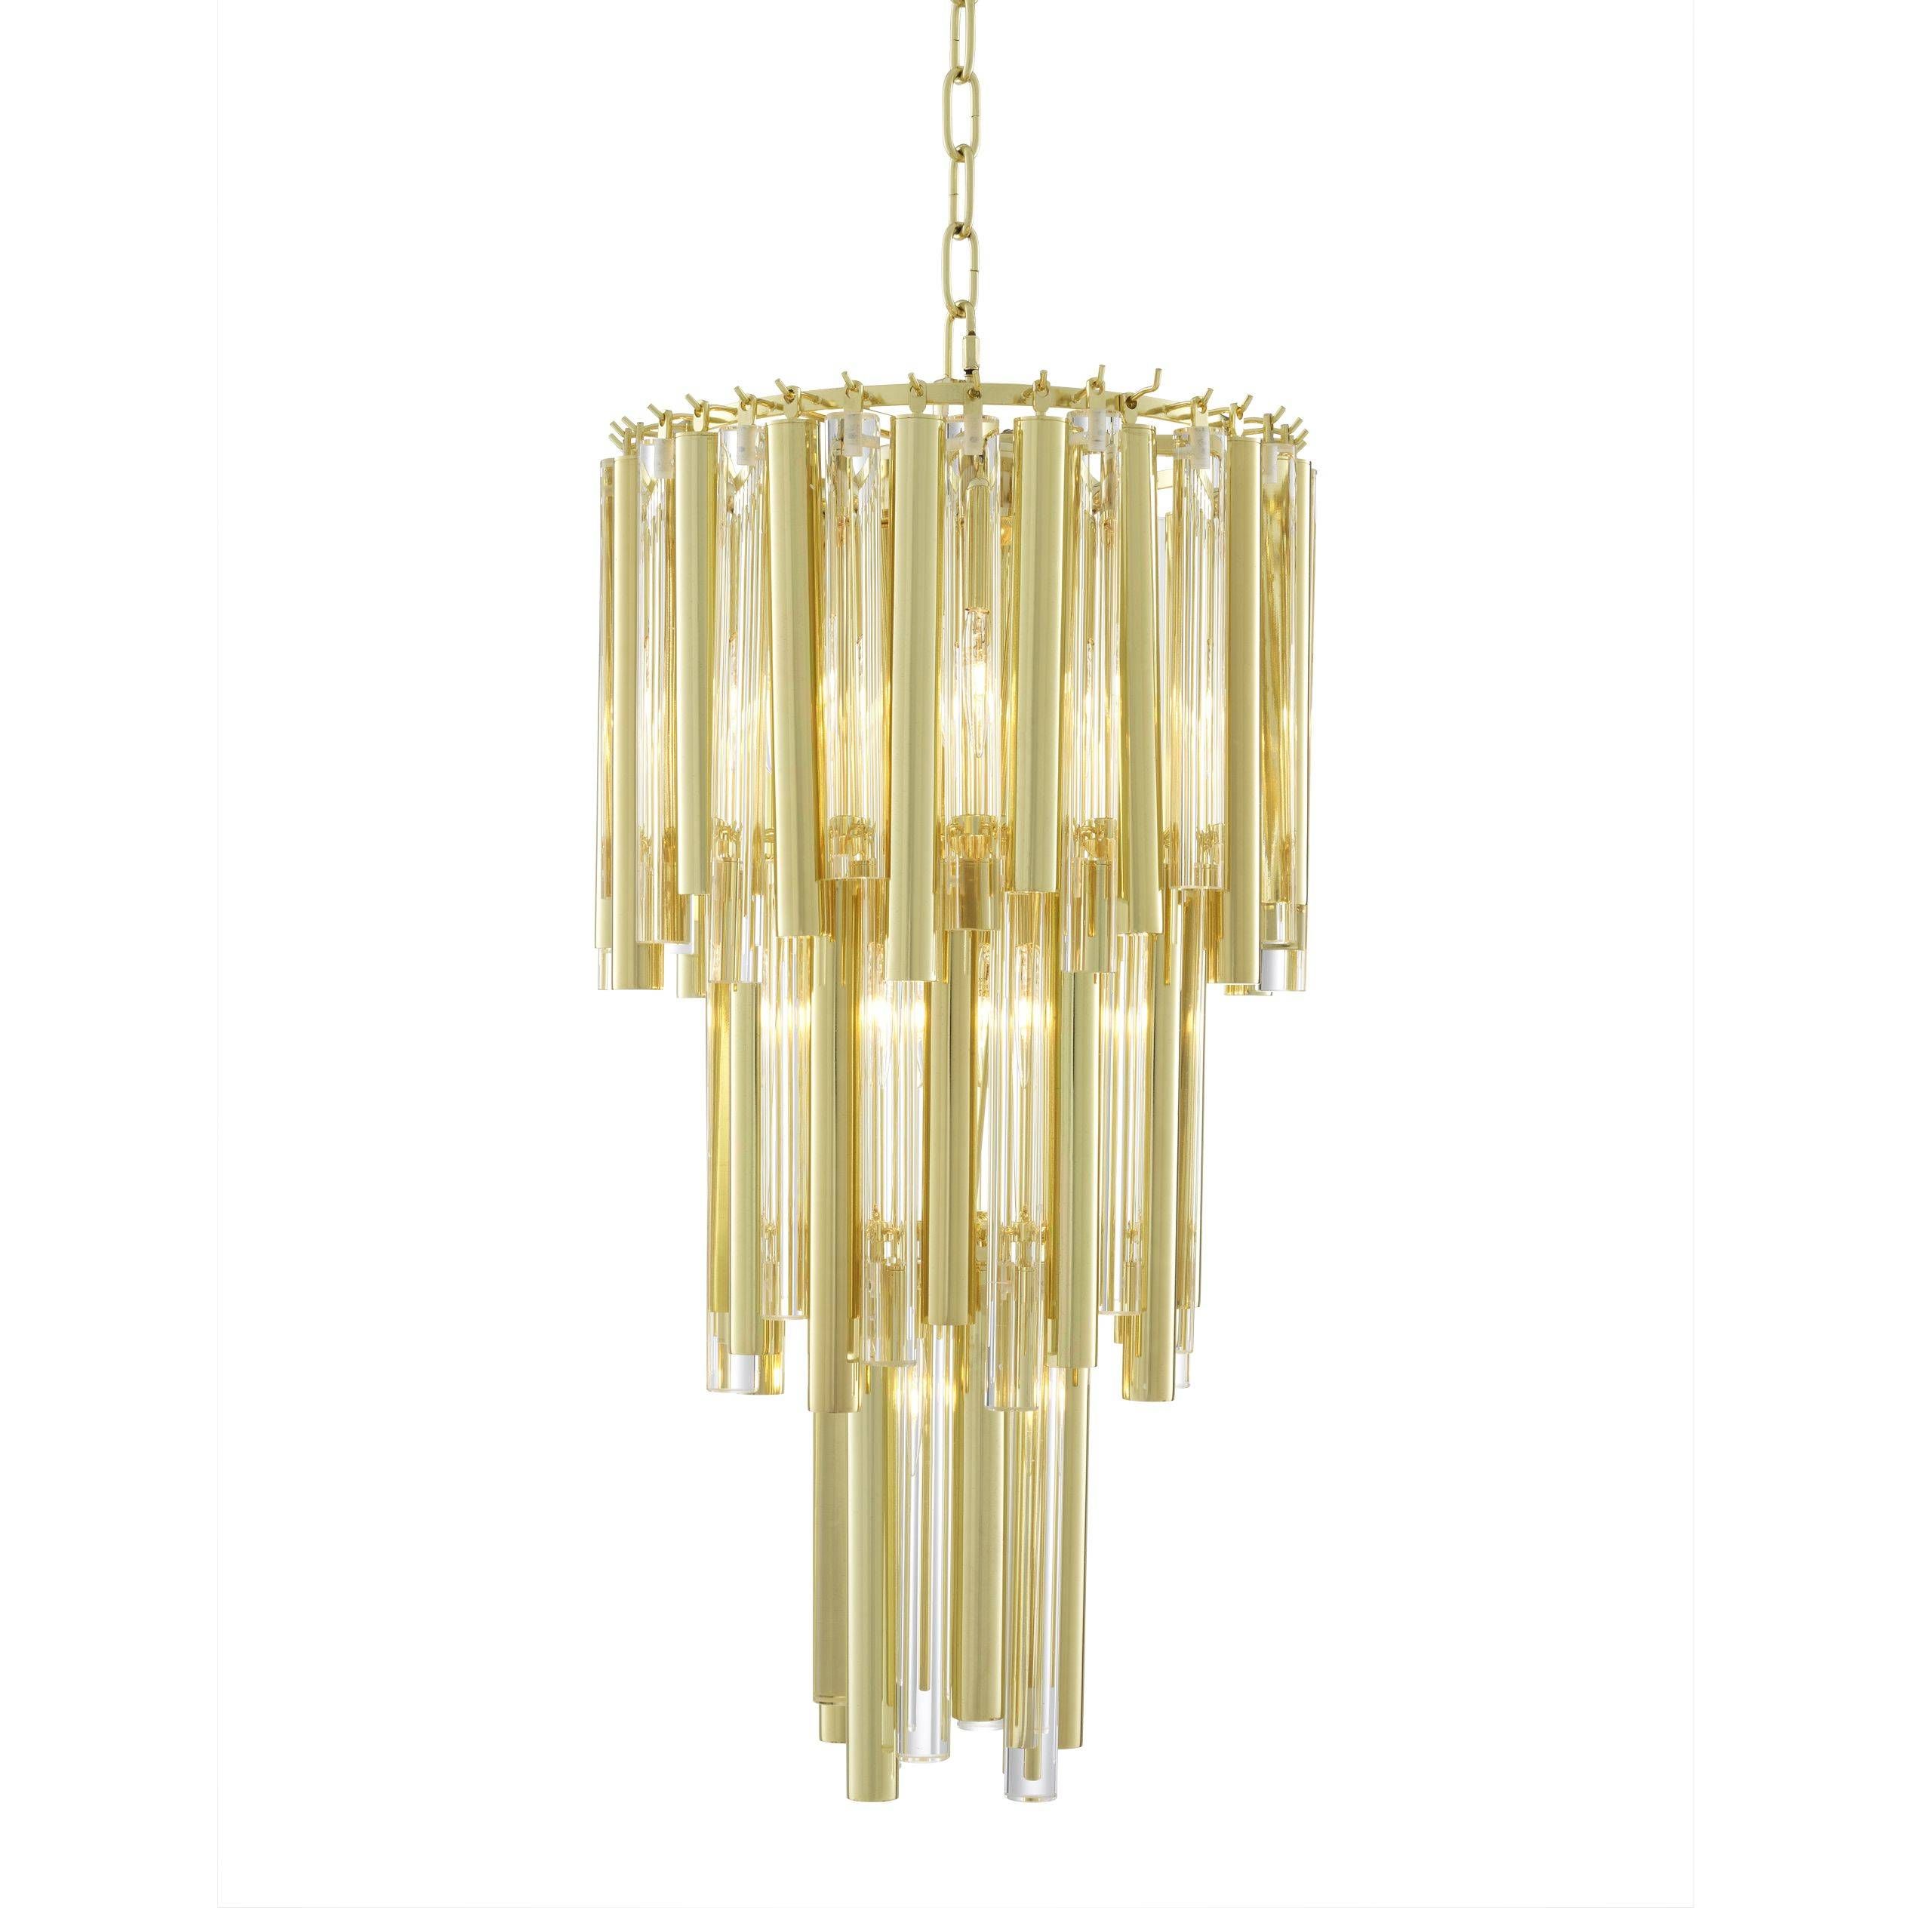 The Best Chandeliers For Your Home Transform Your Home With Stunning Chandeliers That Will Illuminate Your Space